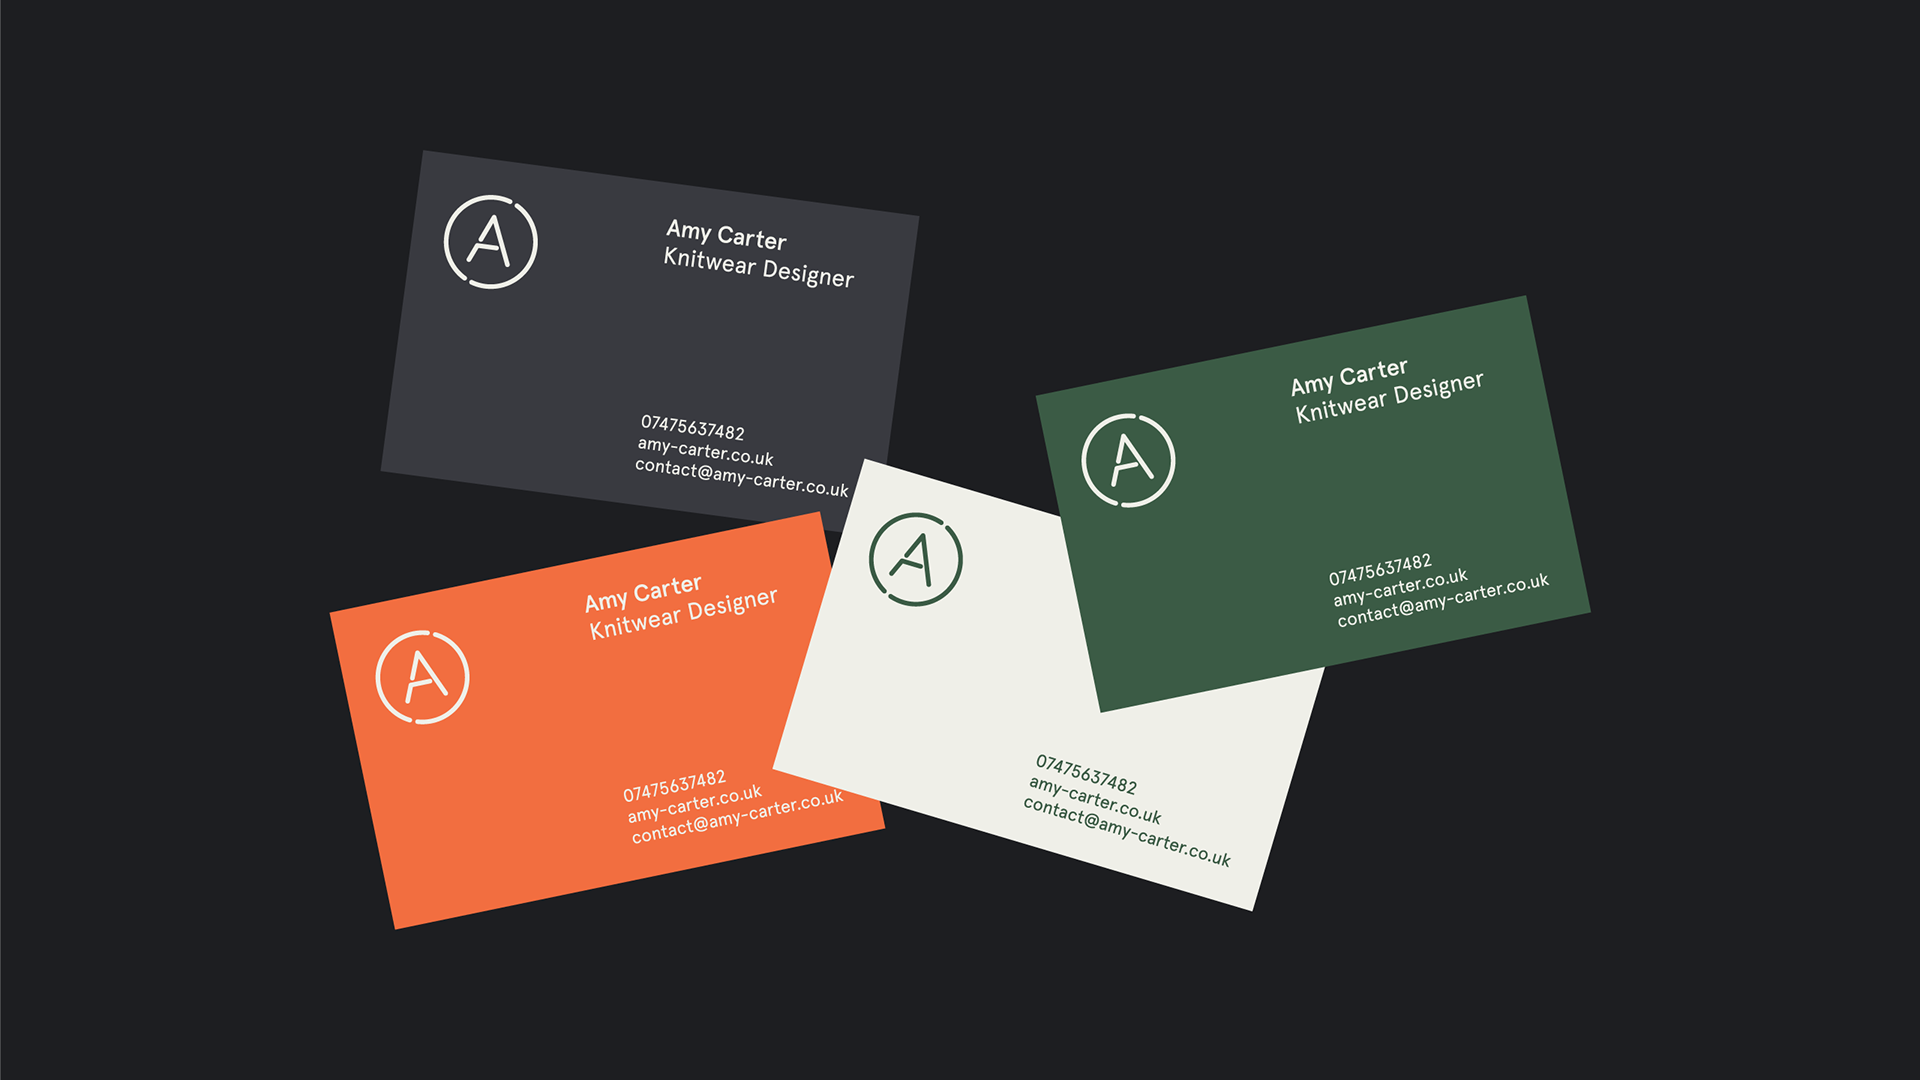 good company message for business cards 3